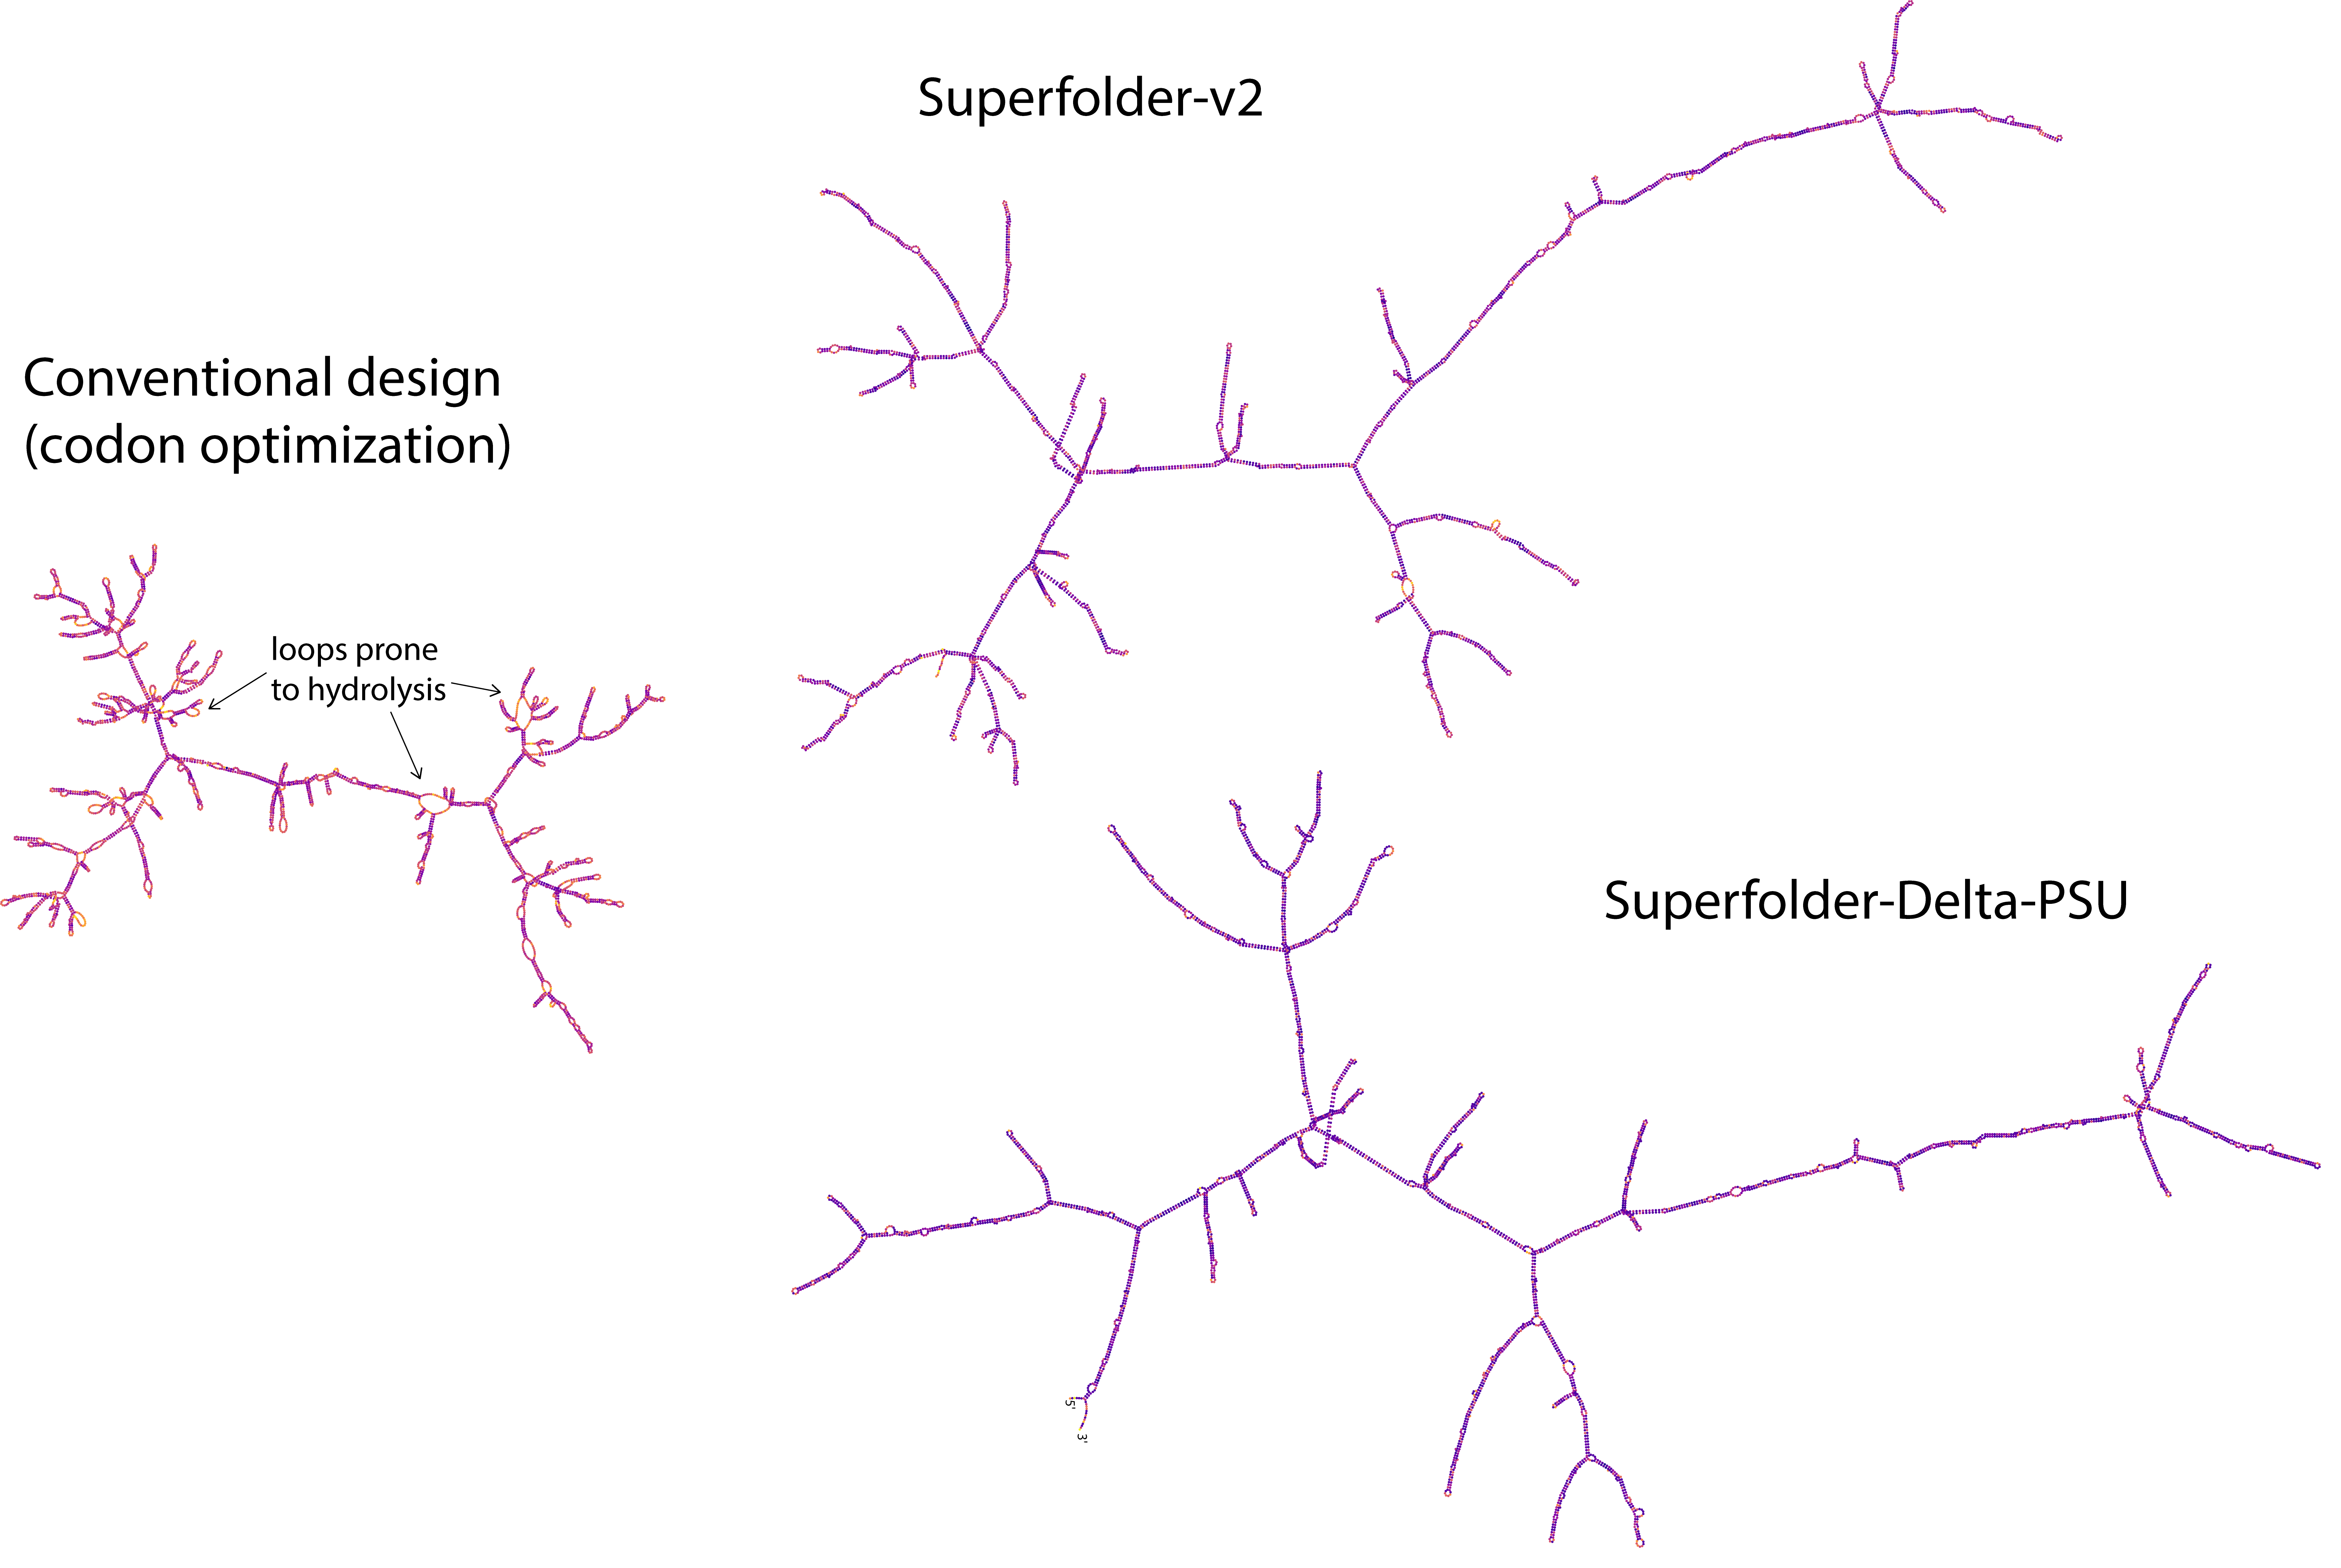 Secondary structure of standard mRNA and superfolder